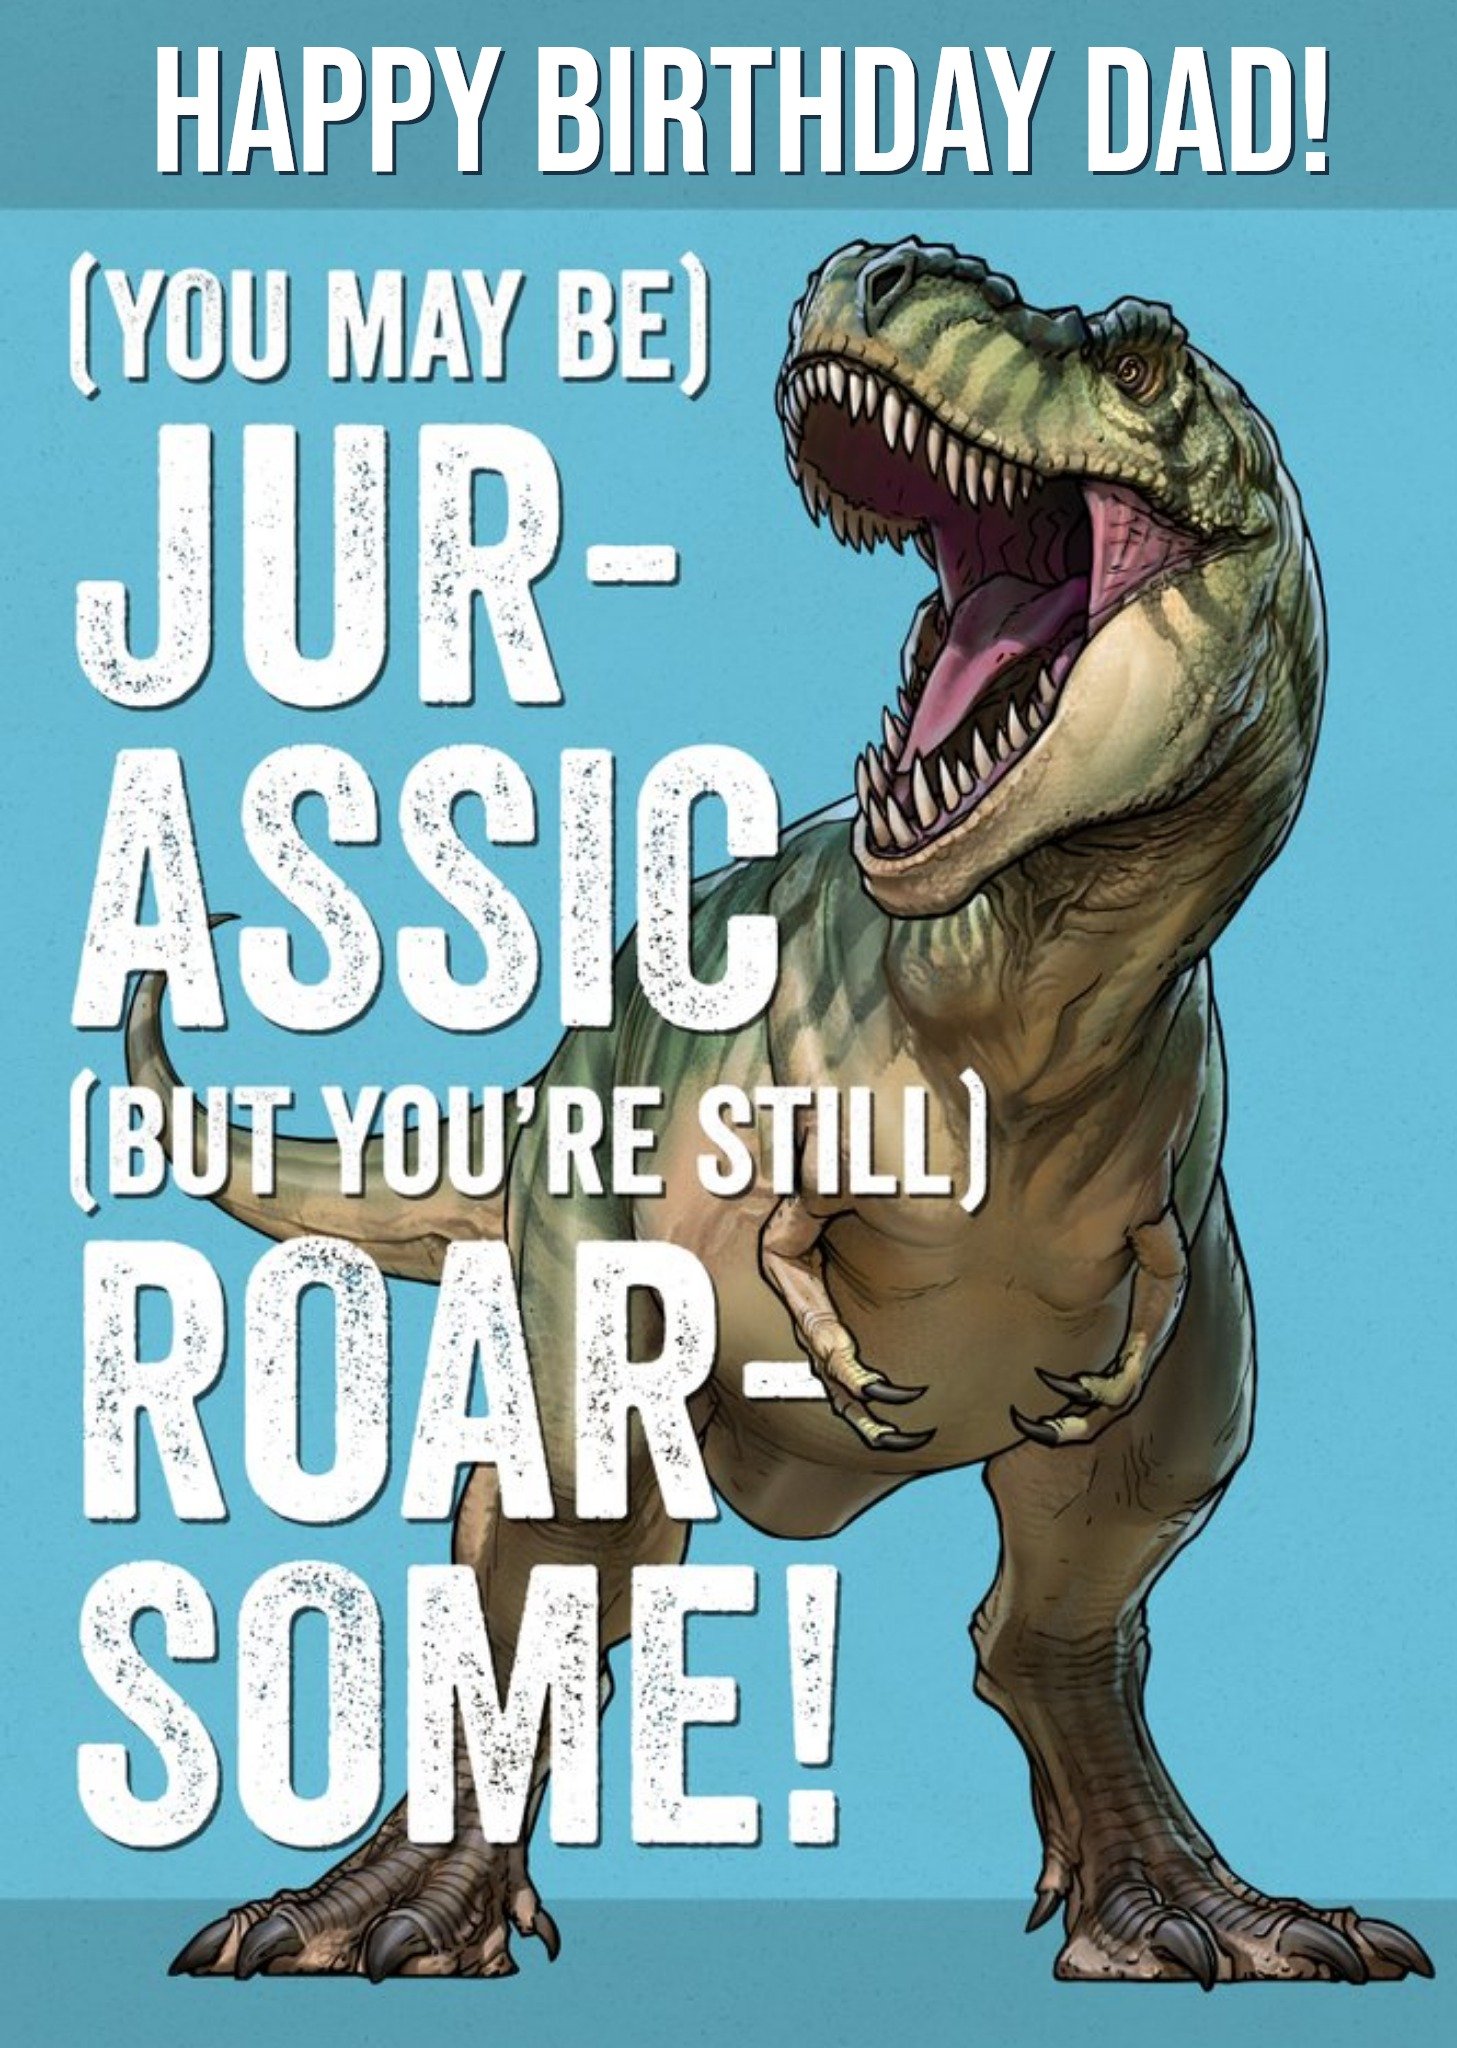 The Natural History Museum Dad Dinosaur Birthday Card - (You May Be) Jurrassic, Large